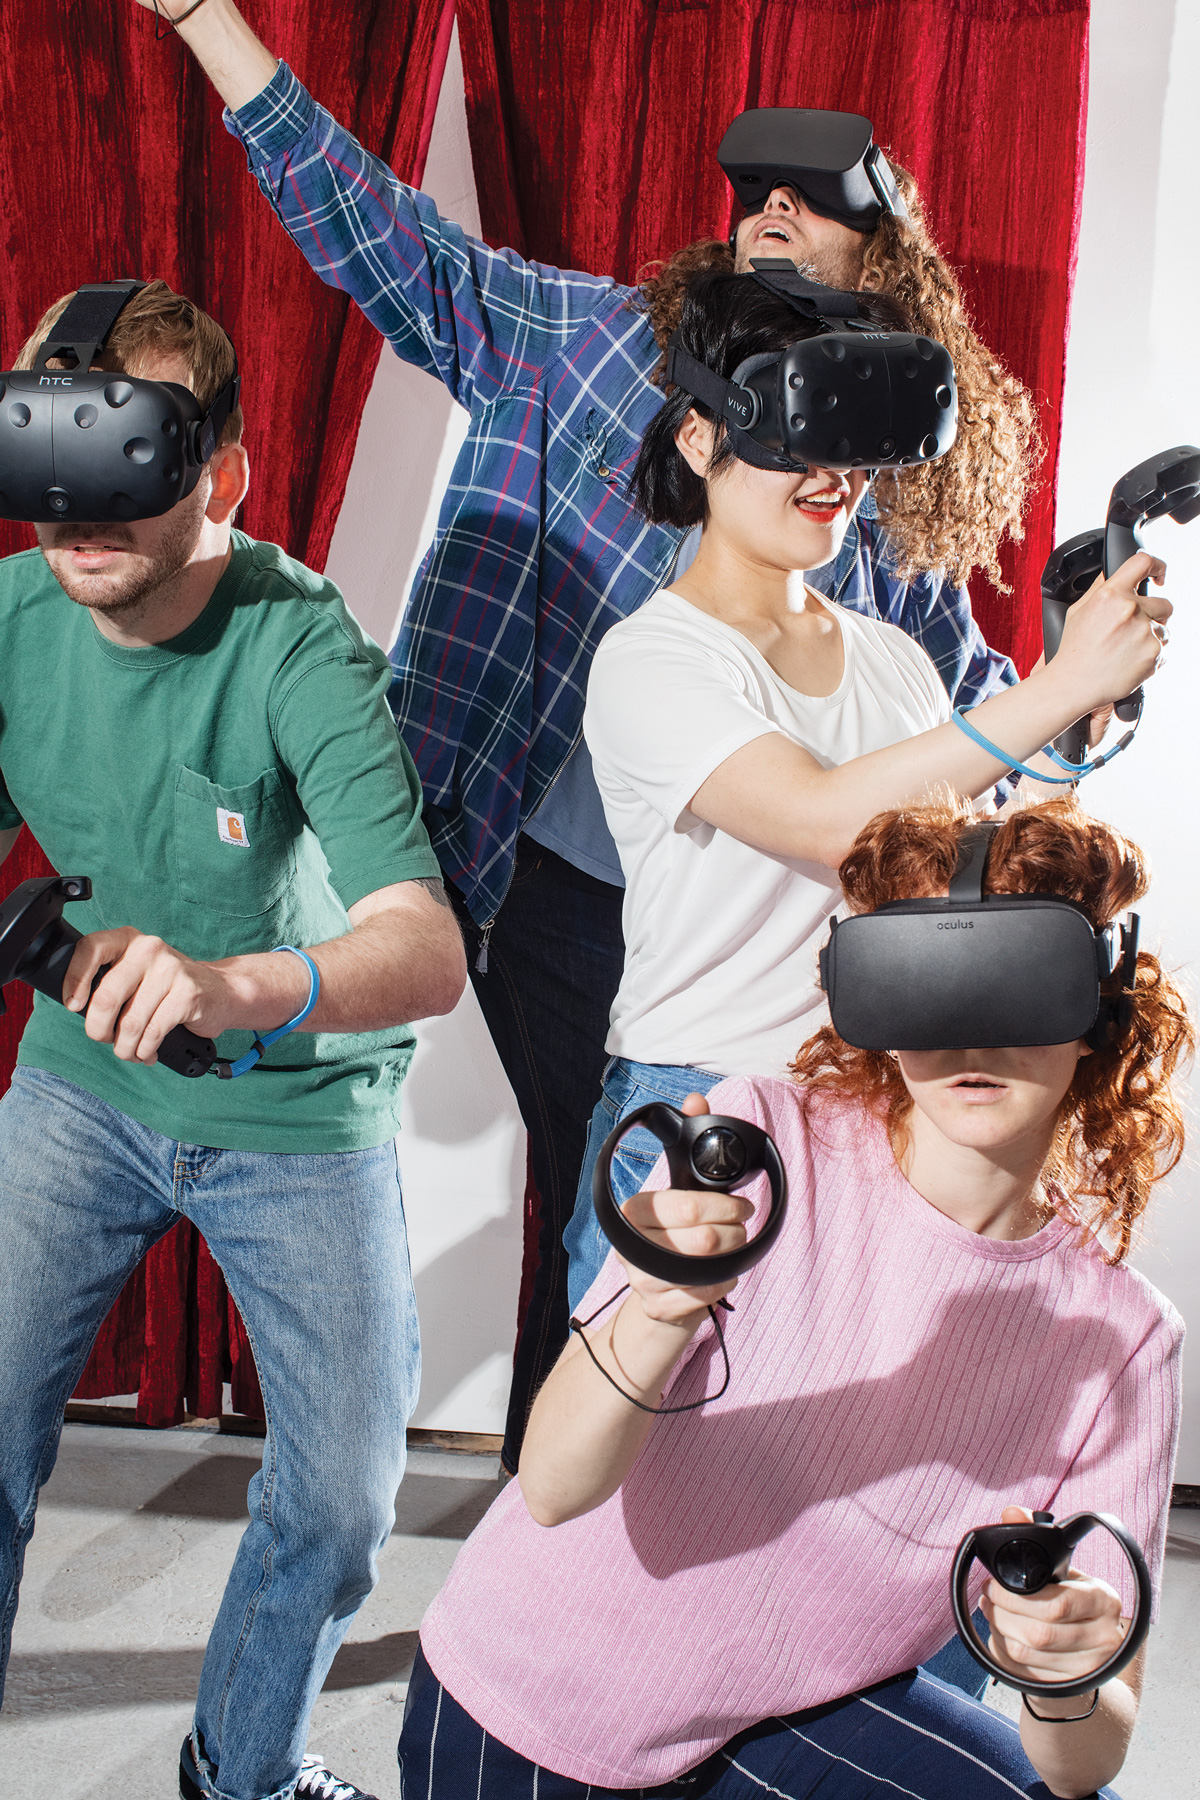 Virtual Reality's Missing Element: Other People | MIT Technology Review